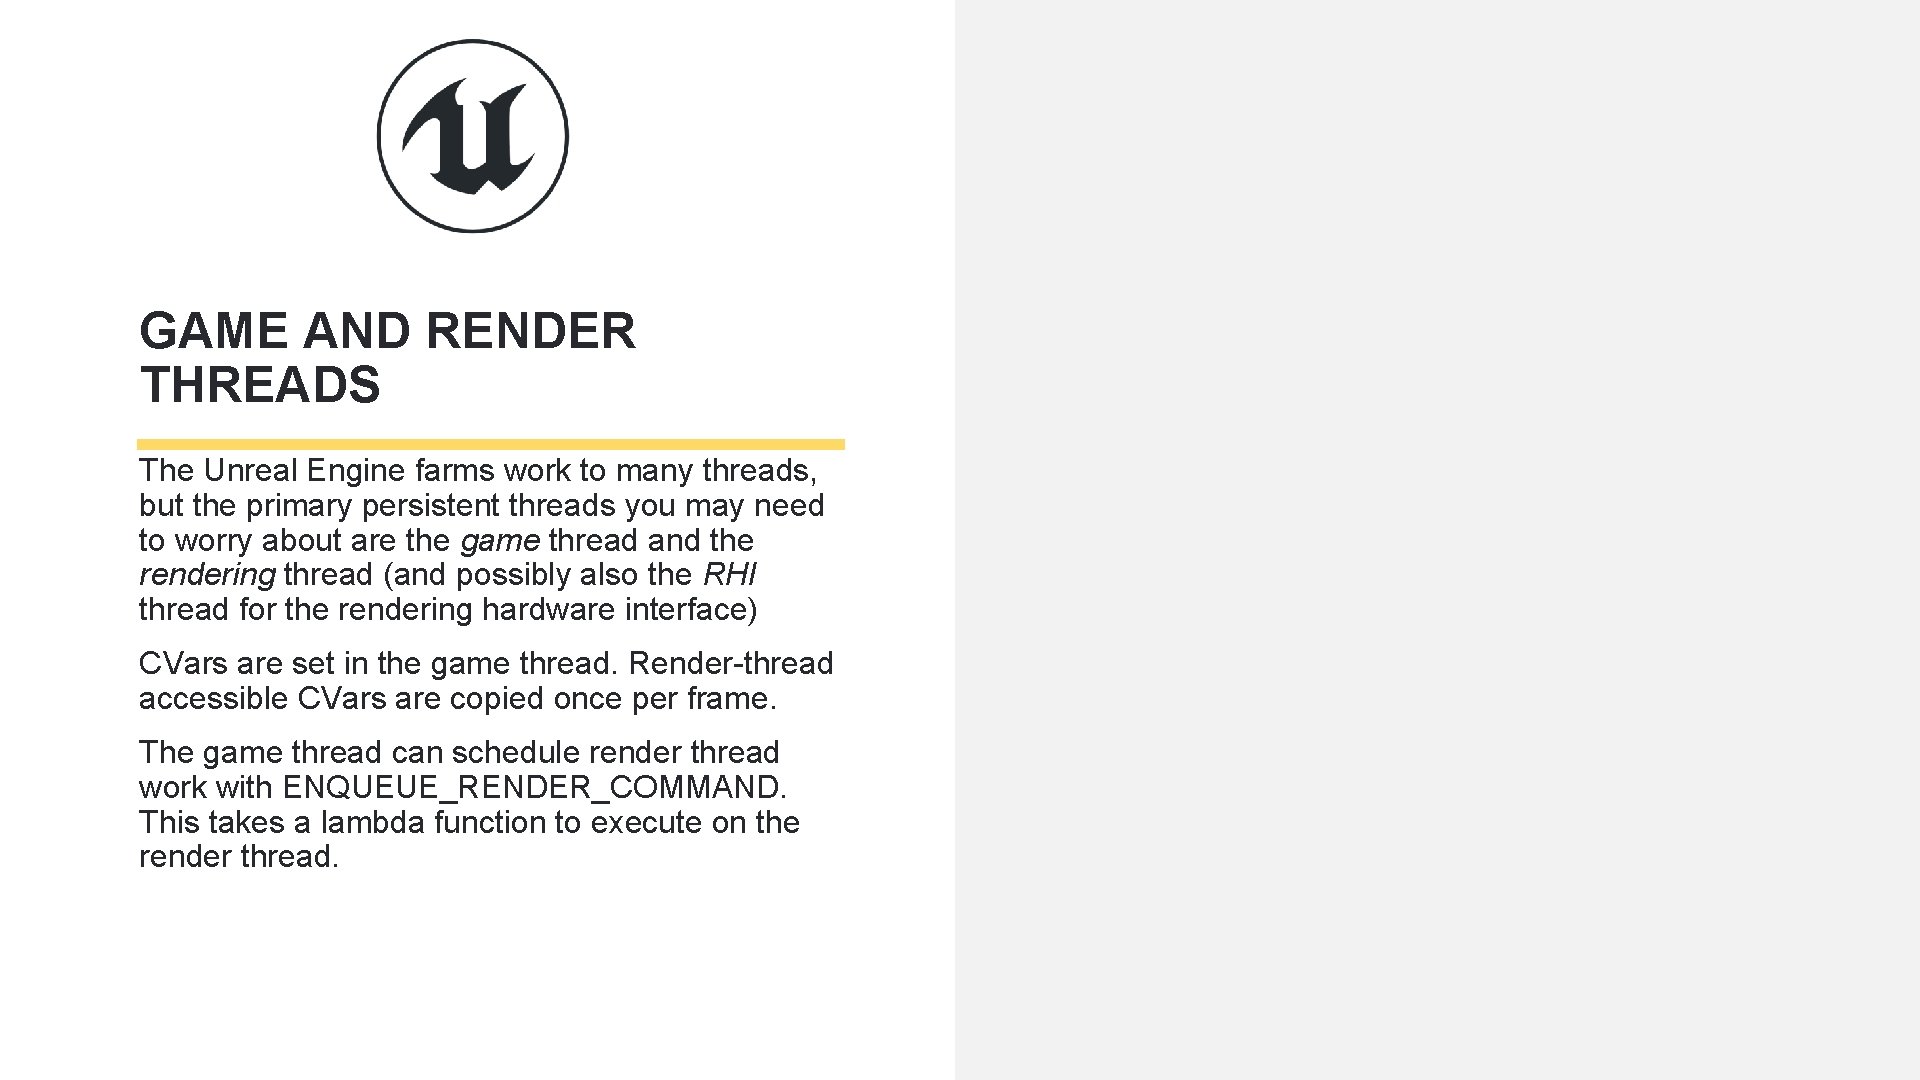 GAME AND RENDER THREADS The Unreal Engine farms work to many threads, but the